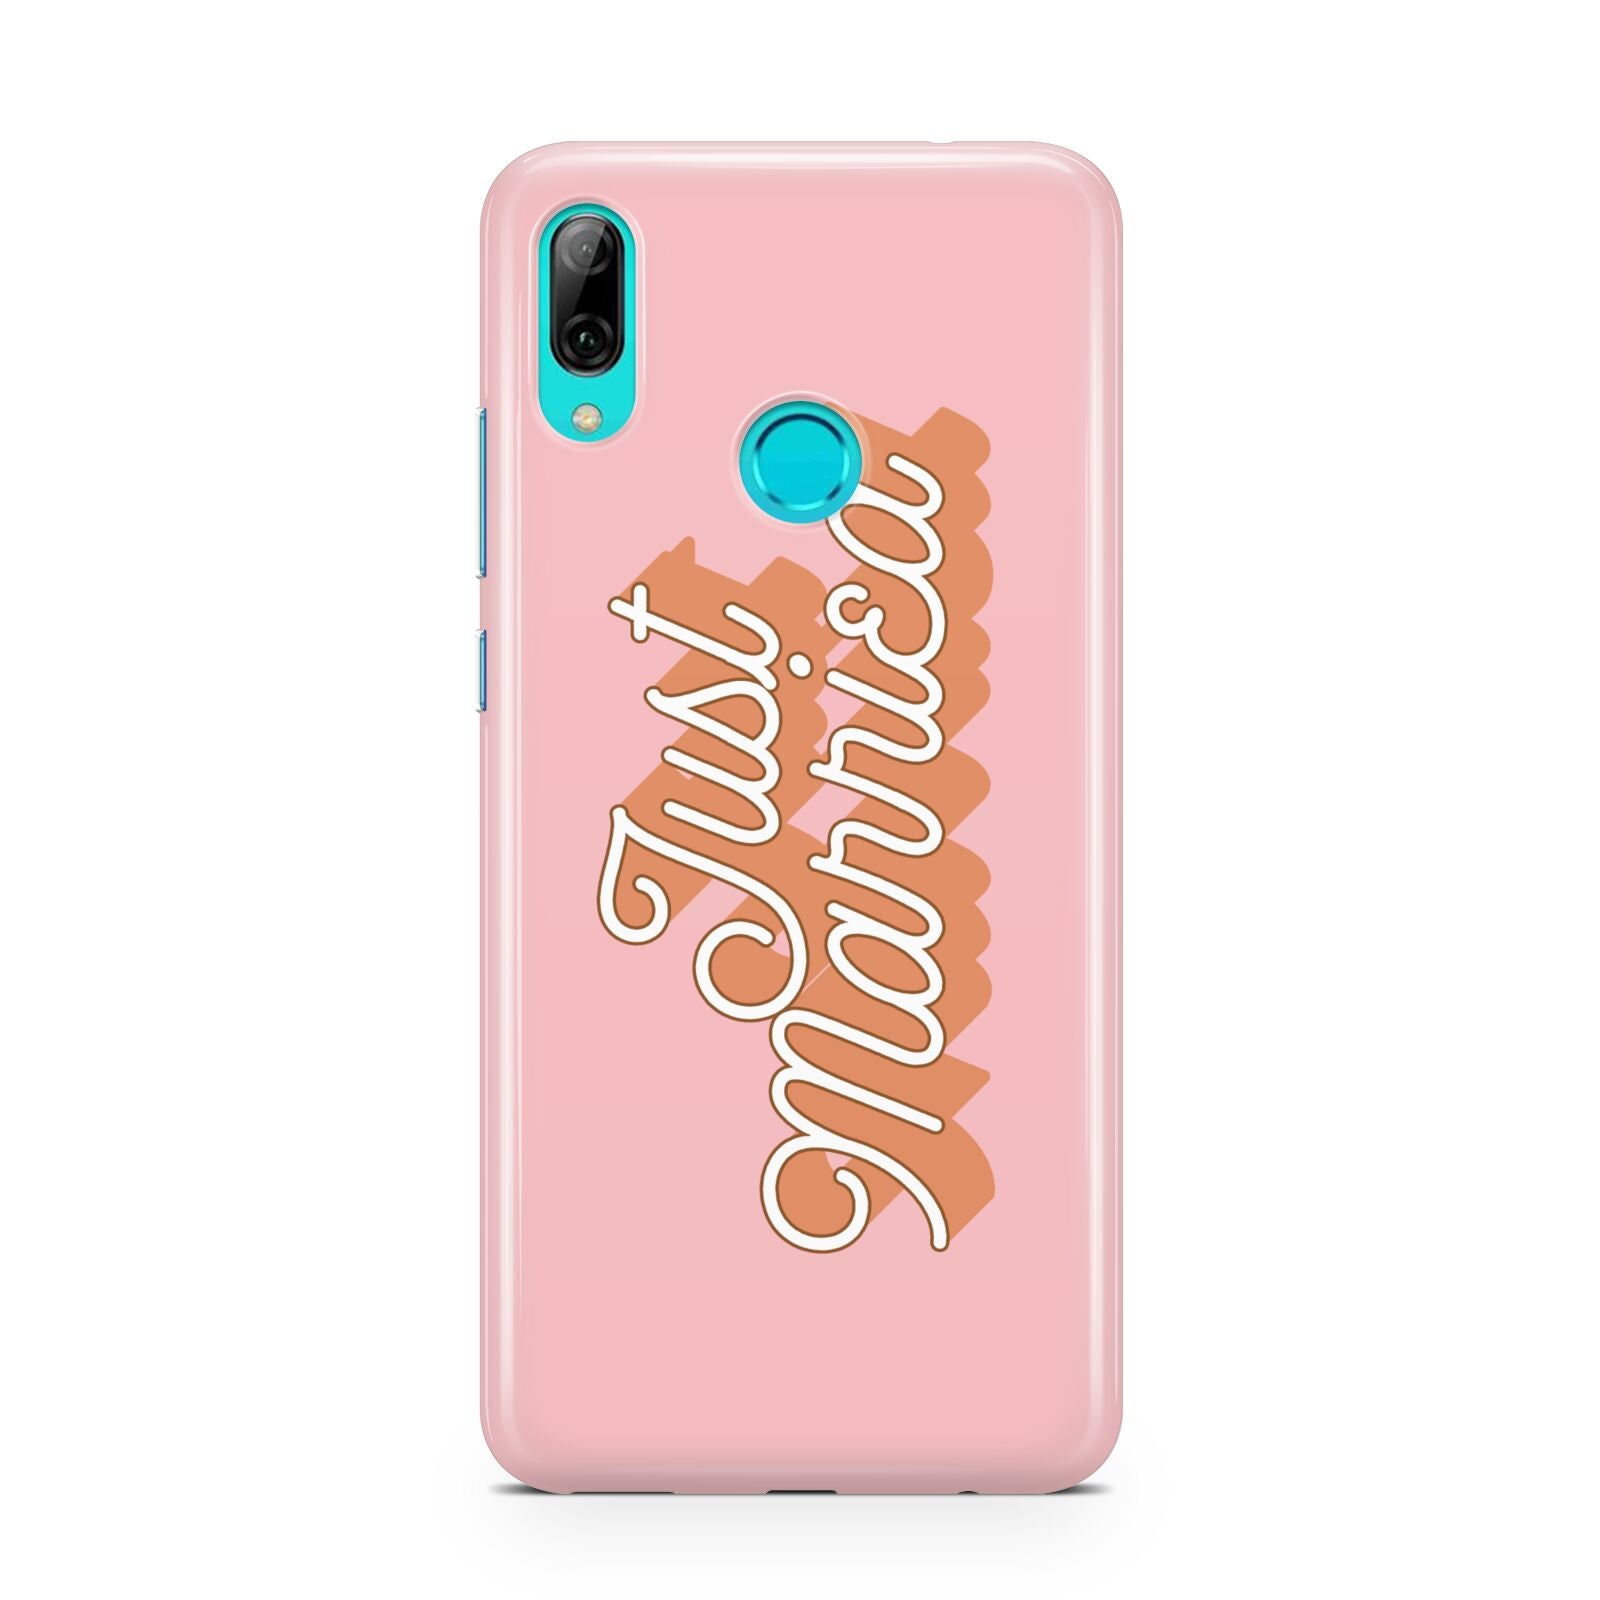 Just Married Pink Huawei P Smart 2019 Case